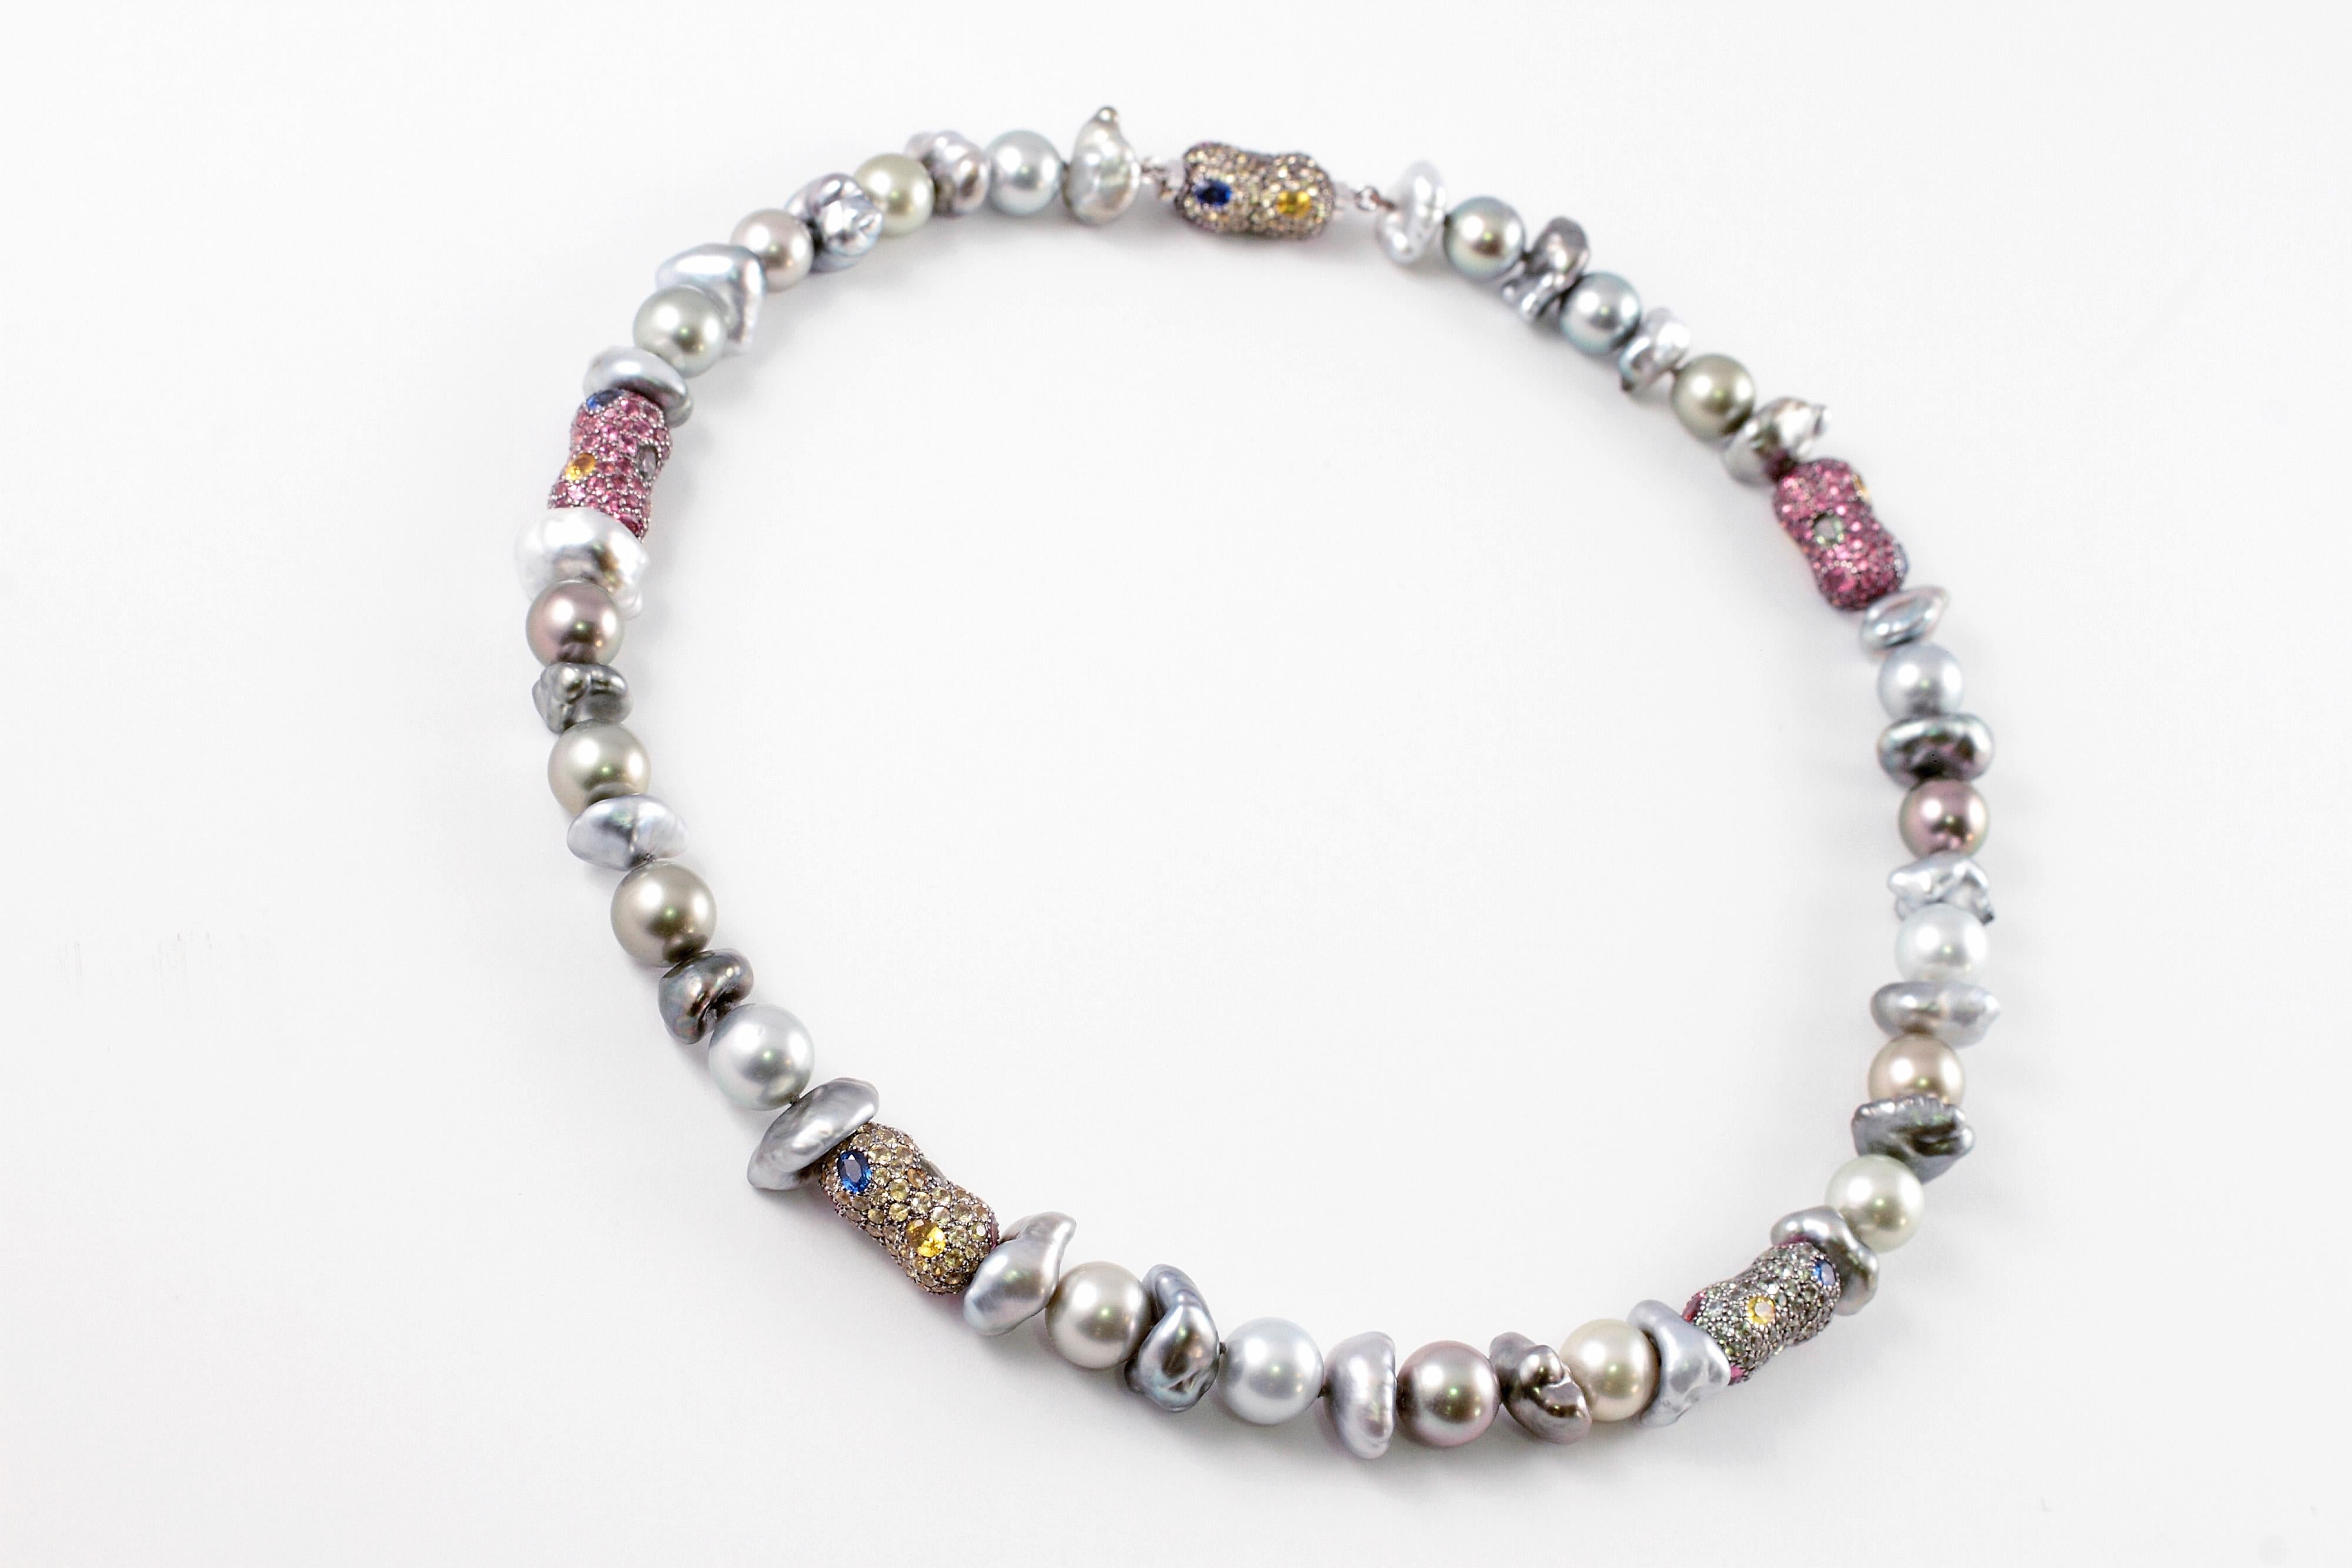 From famed Australian designer Margot McKinney, this fabulous necklace can be worn as one long 40